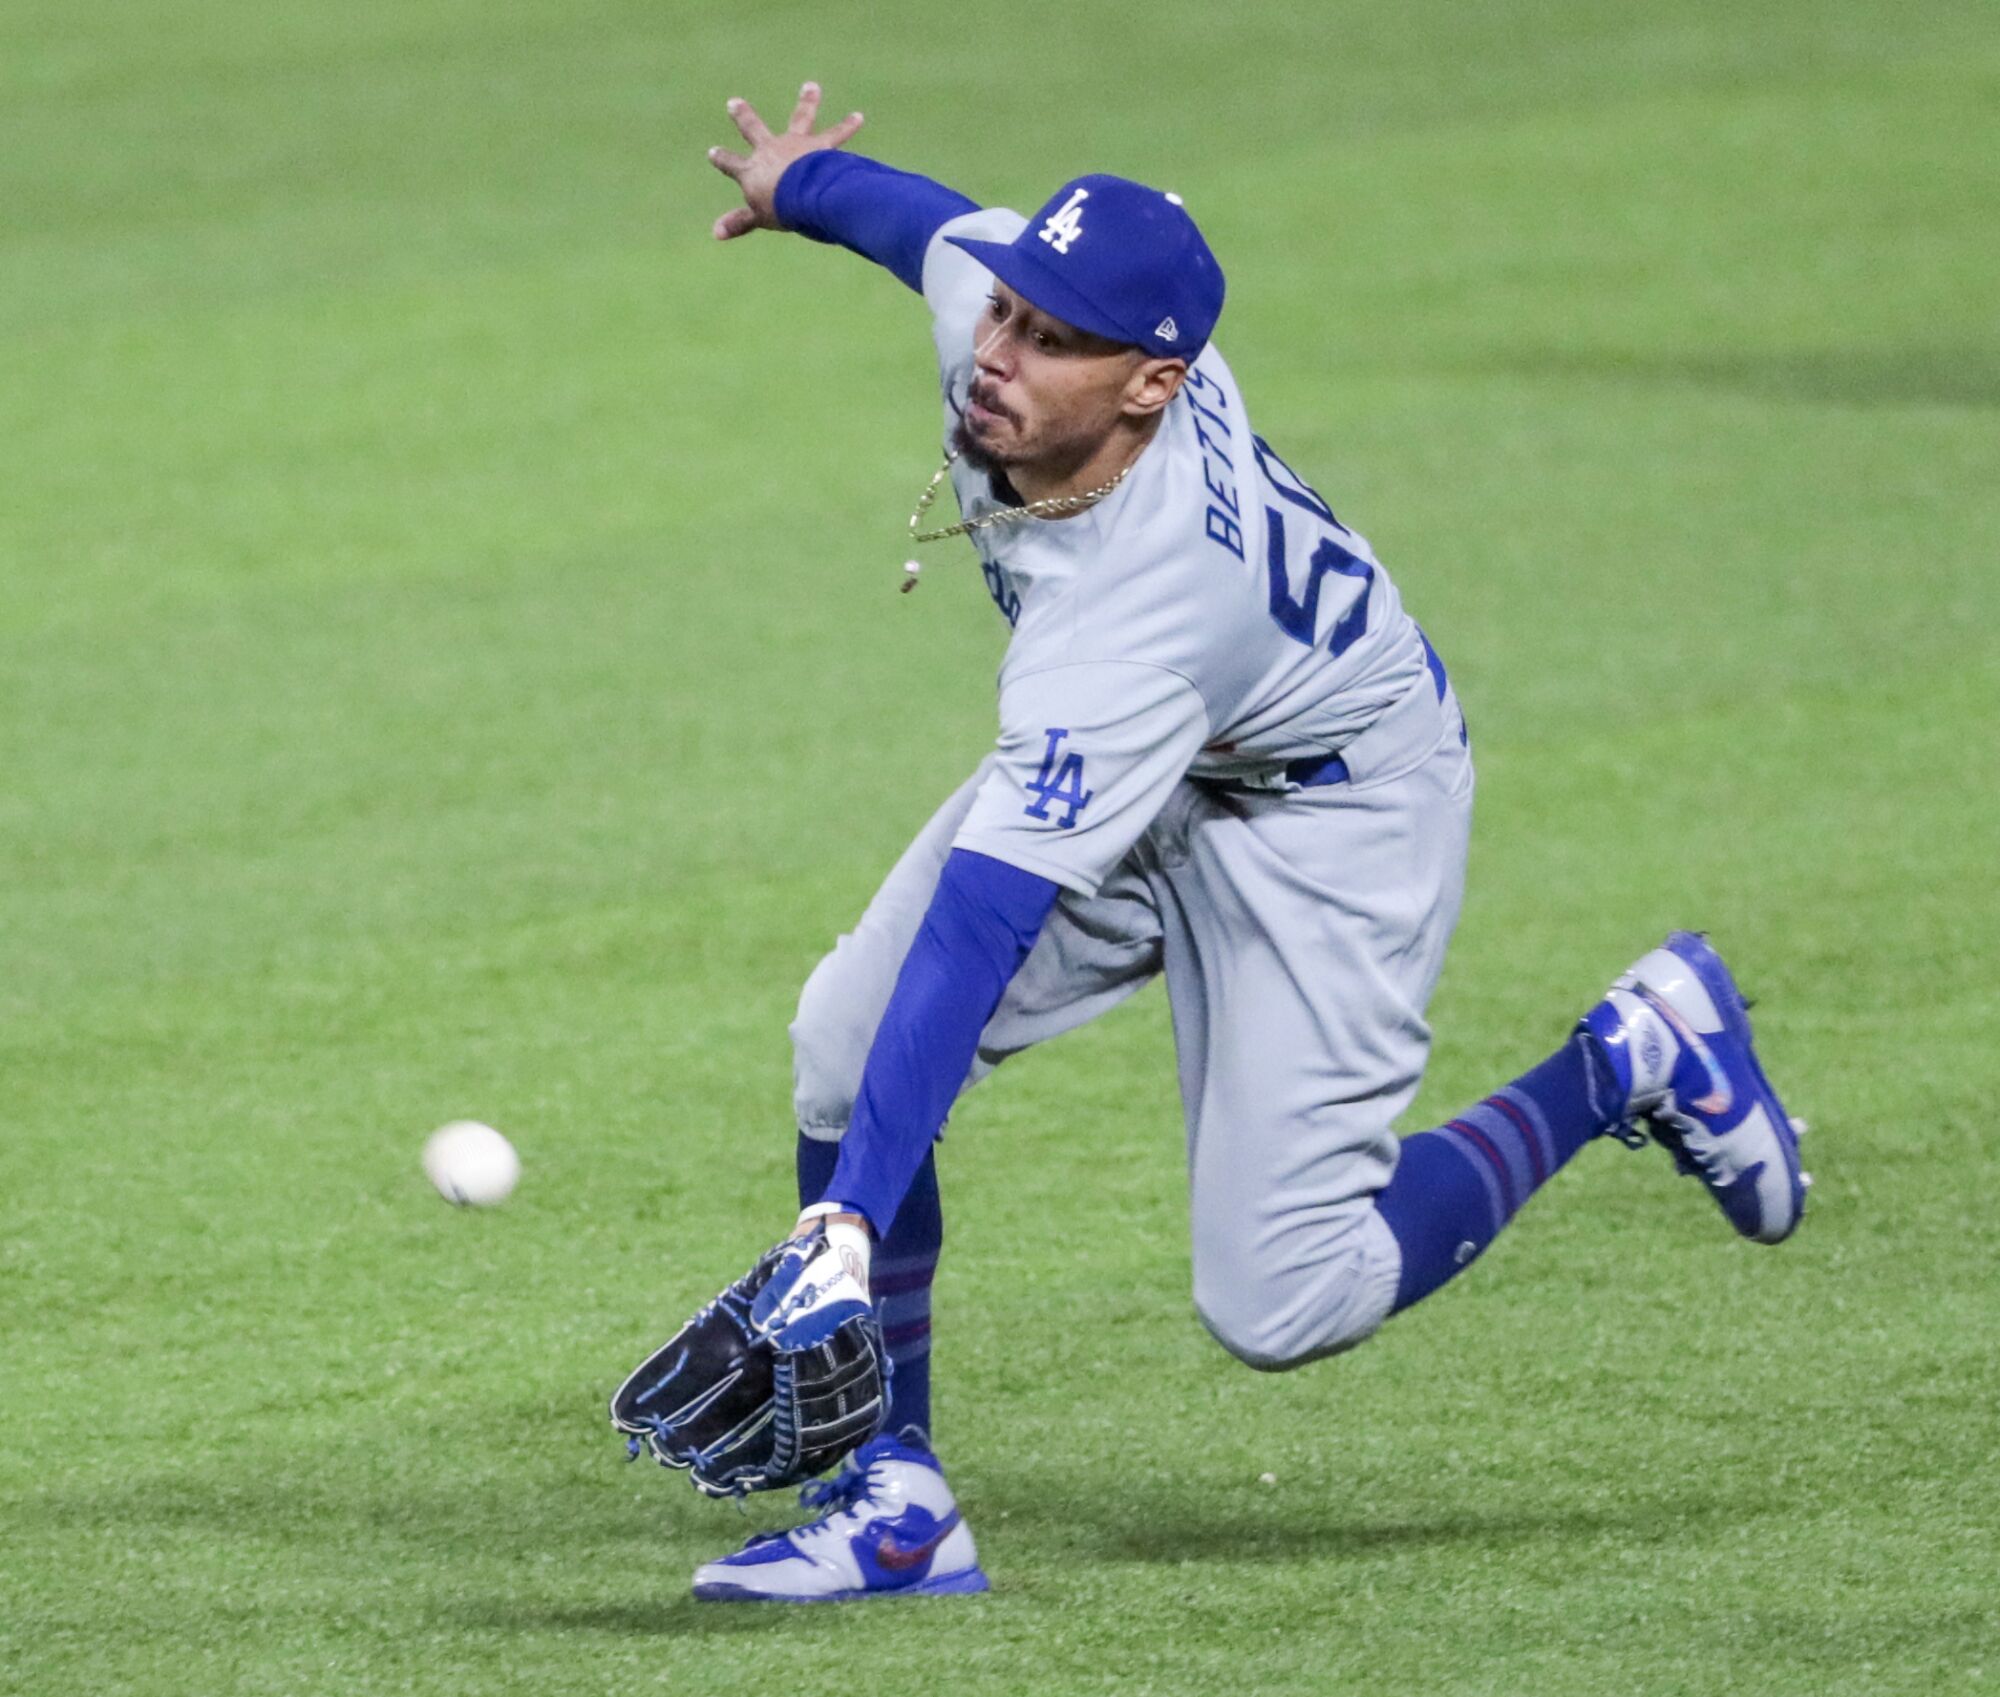 Dodgers right fielder Mookie Betts stretches to make a catch during the third inning of Game 5.